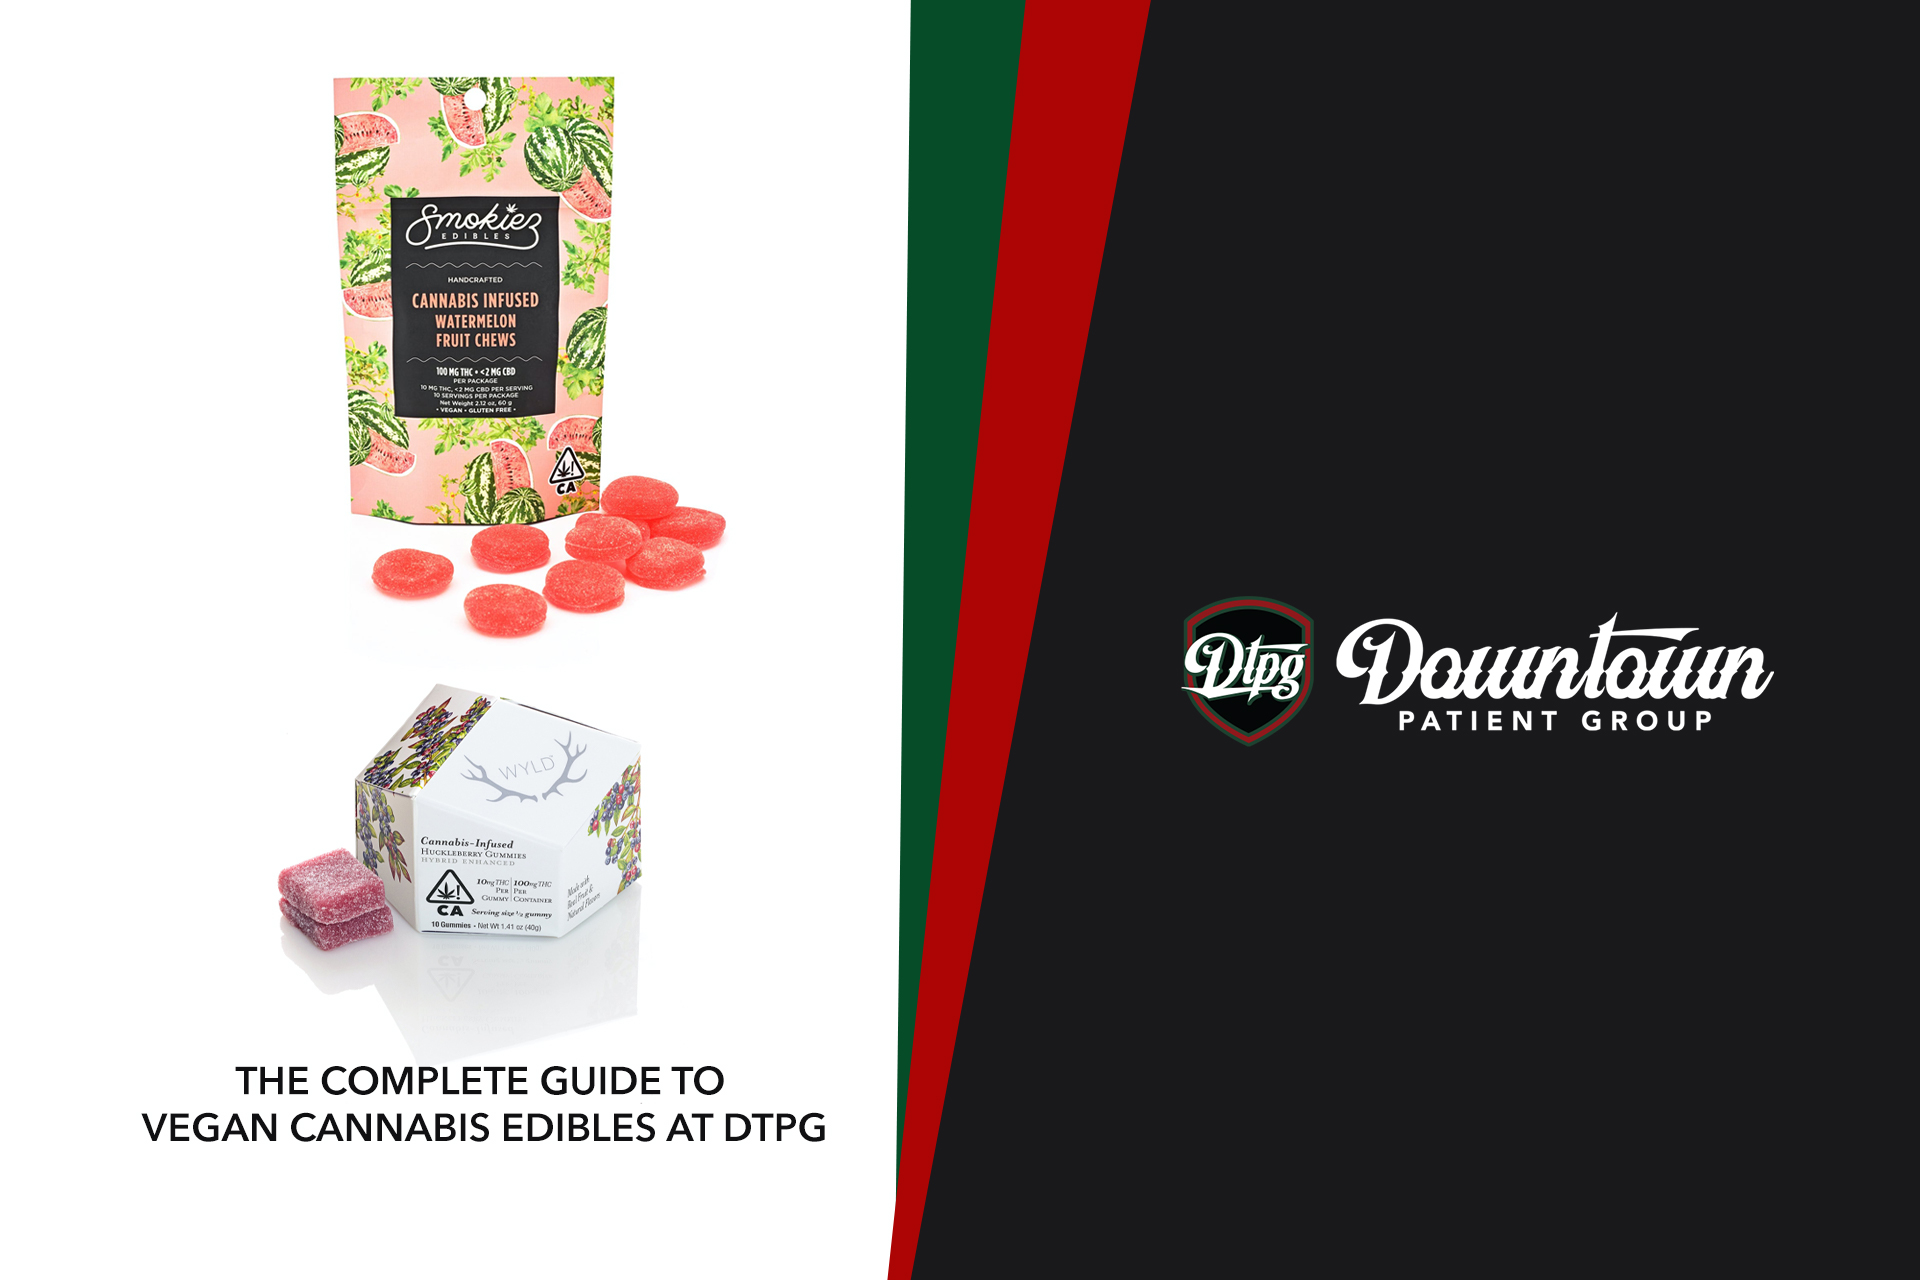 The Complete Guide To Vegan Cannabis Edibles At DTPG